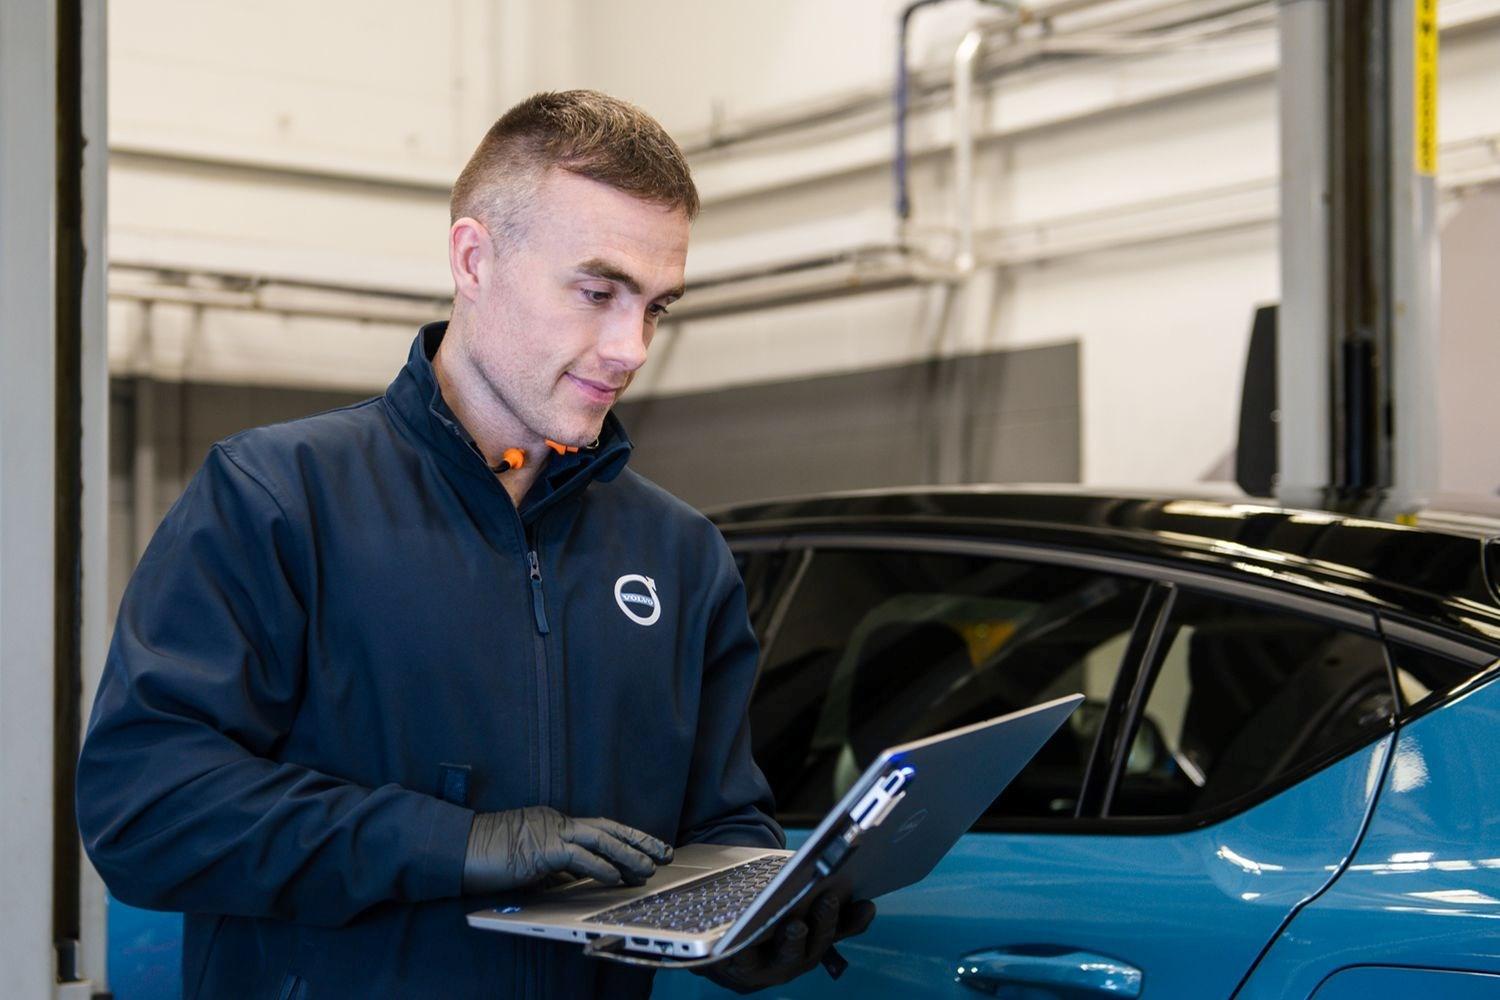 Agnew Belfast Volvo mechanic conducts routine maintenance on used Volvo C40 Recharge with laptop at Volvo repair centre in Belfast, Northern Ireland